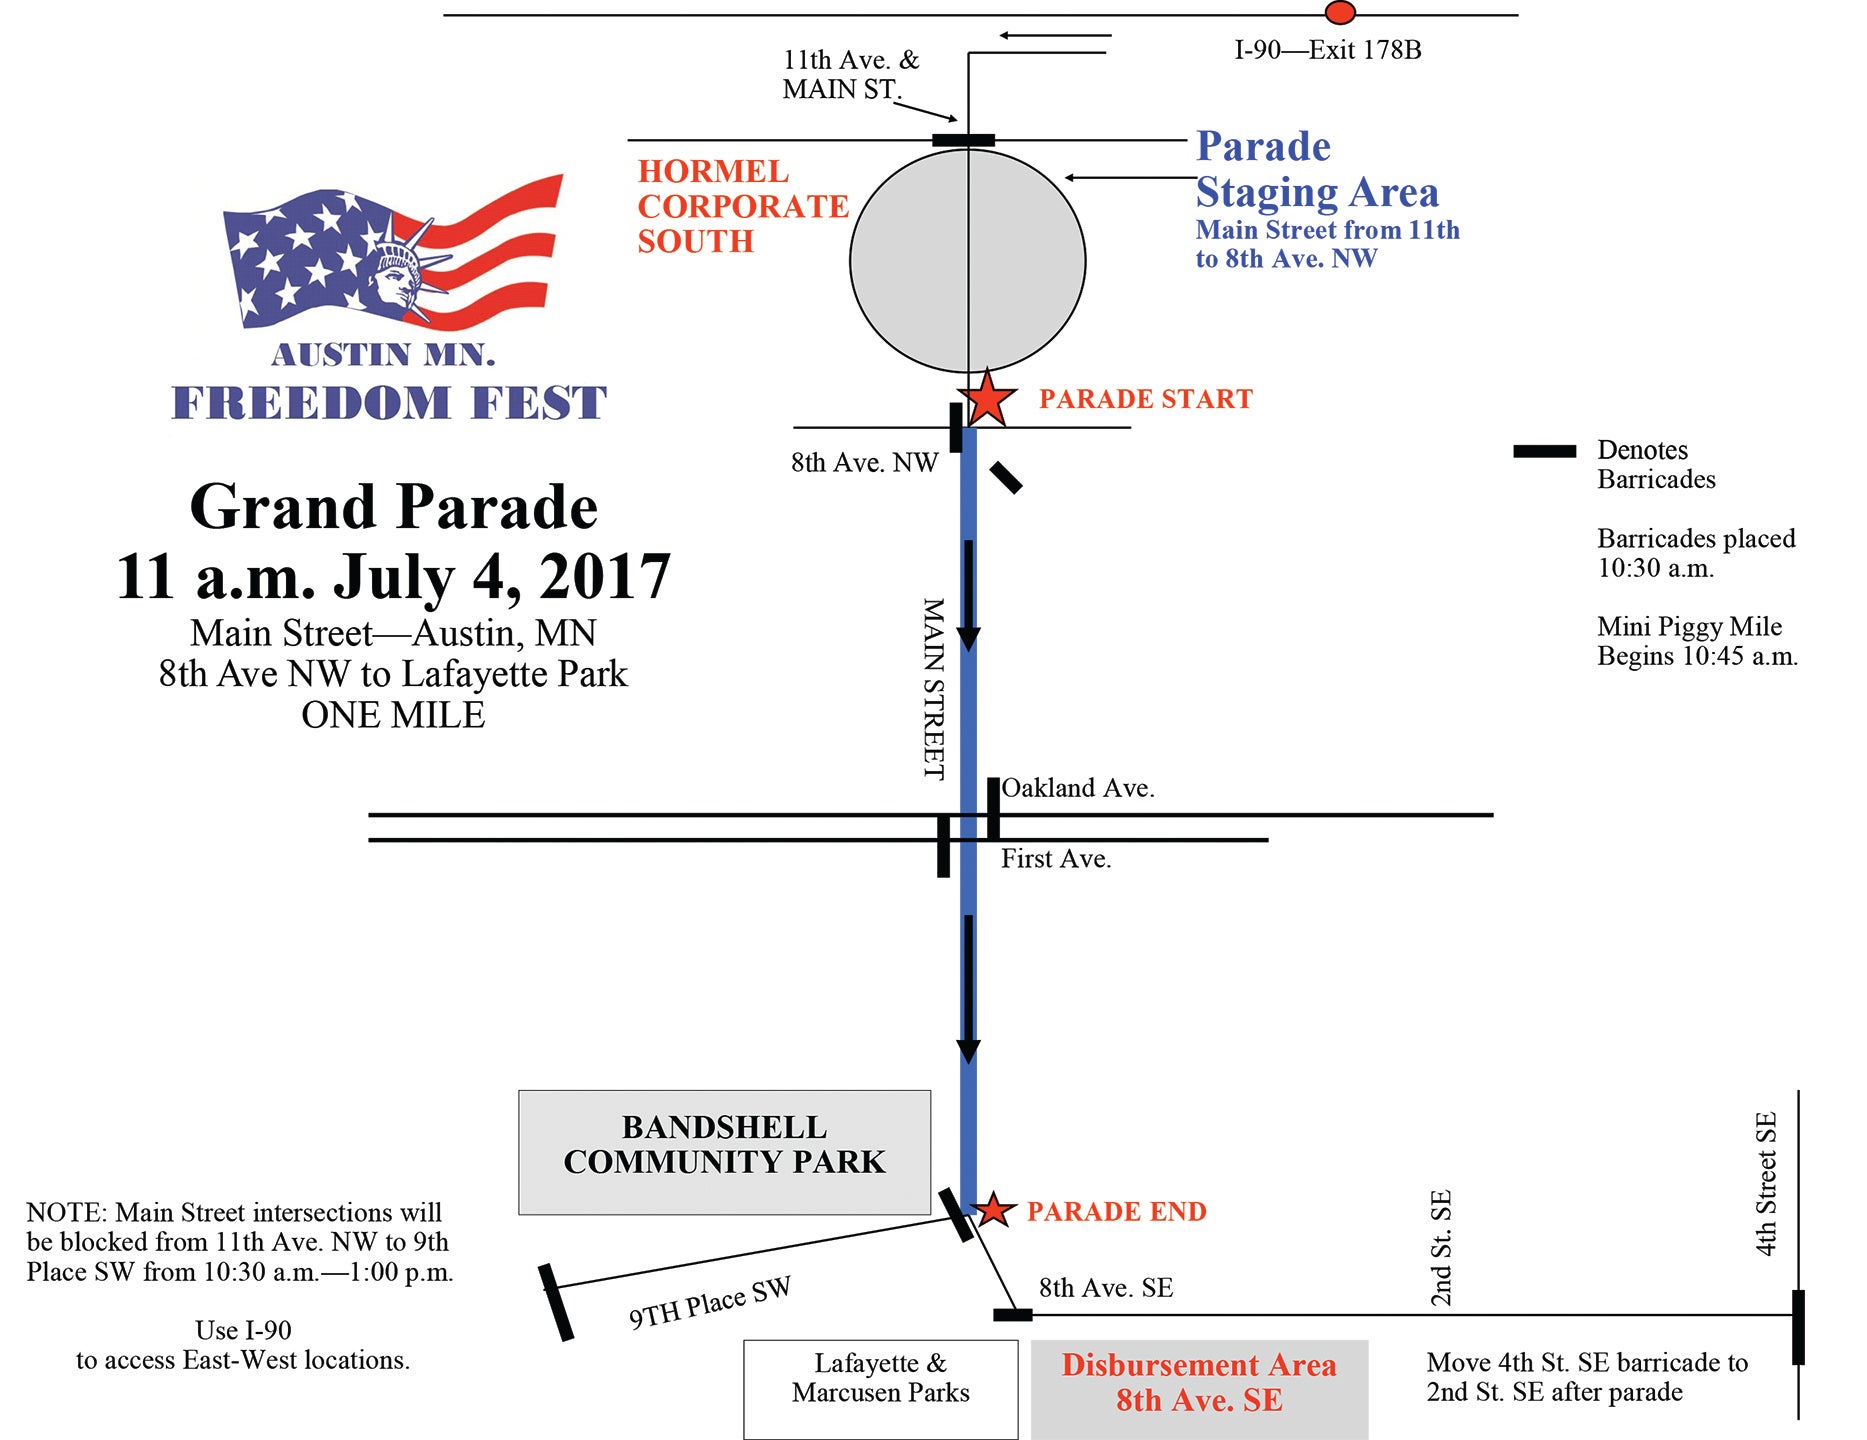 Freedom Fest parade route returns to just Main Street Austin Daily